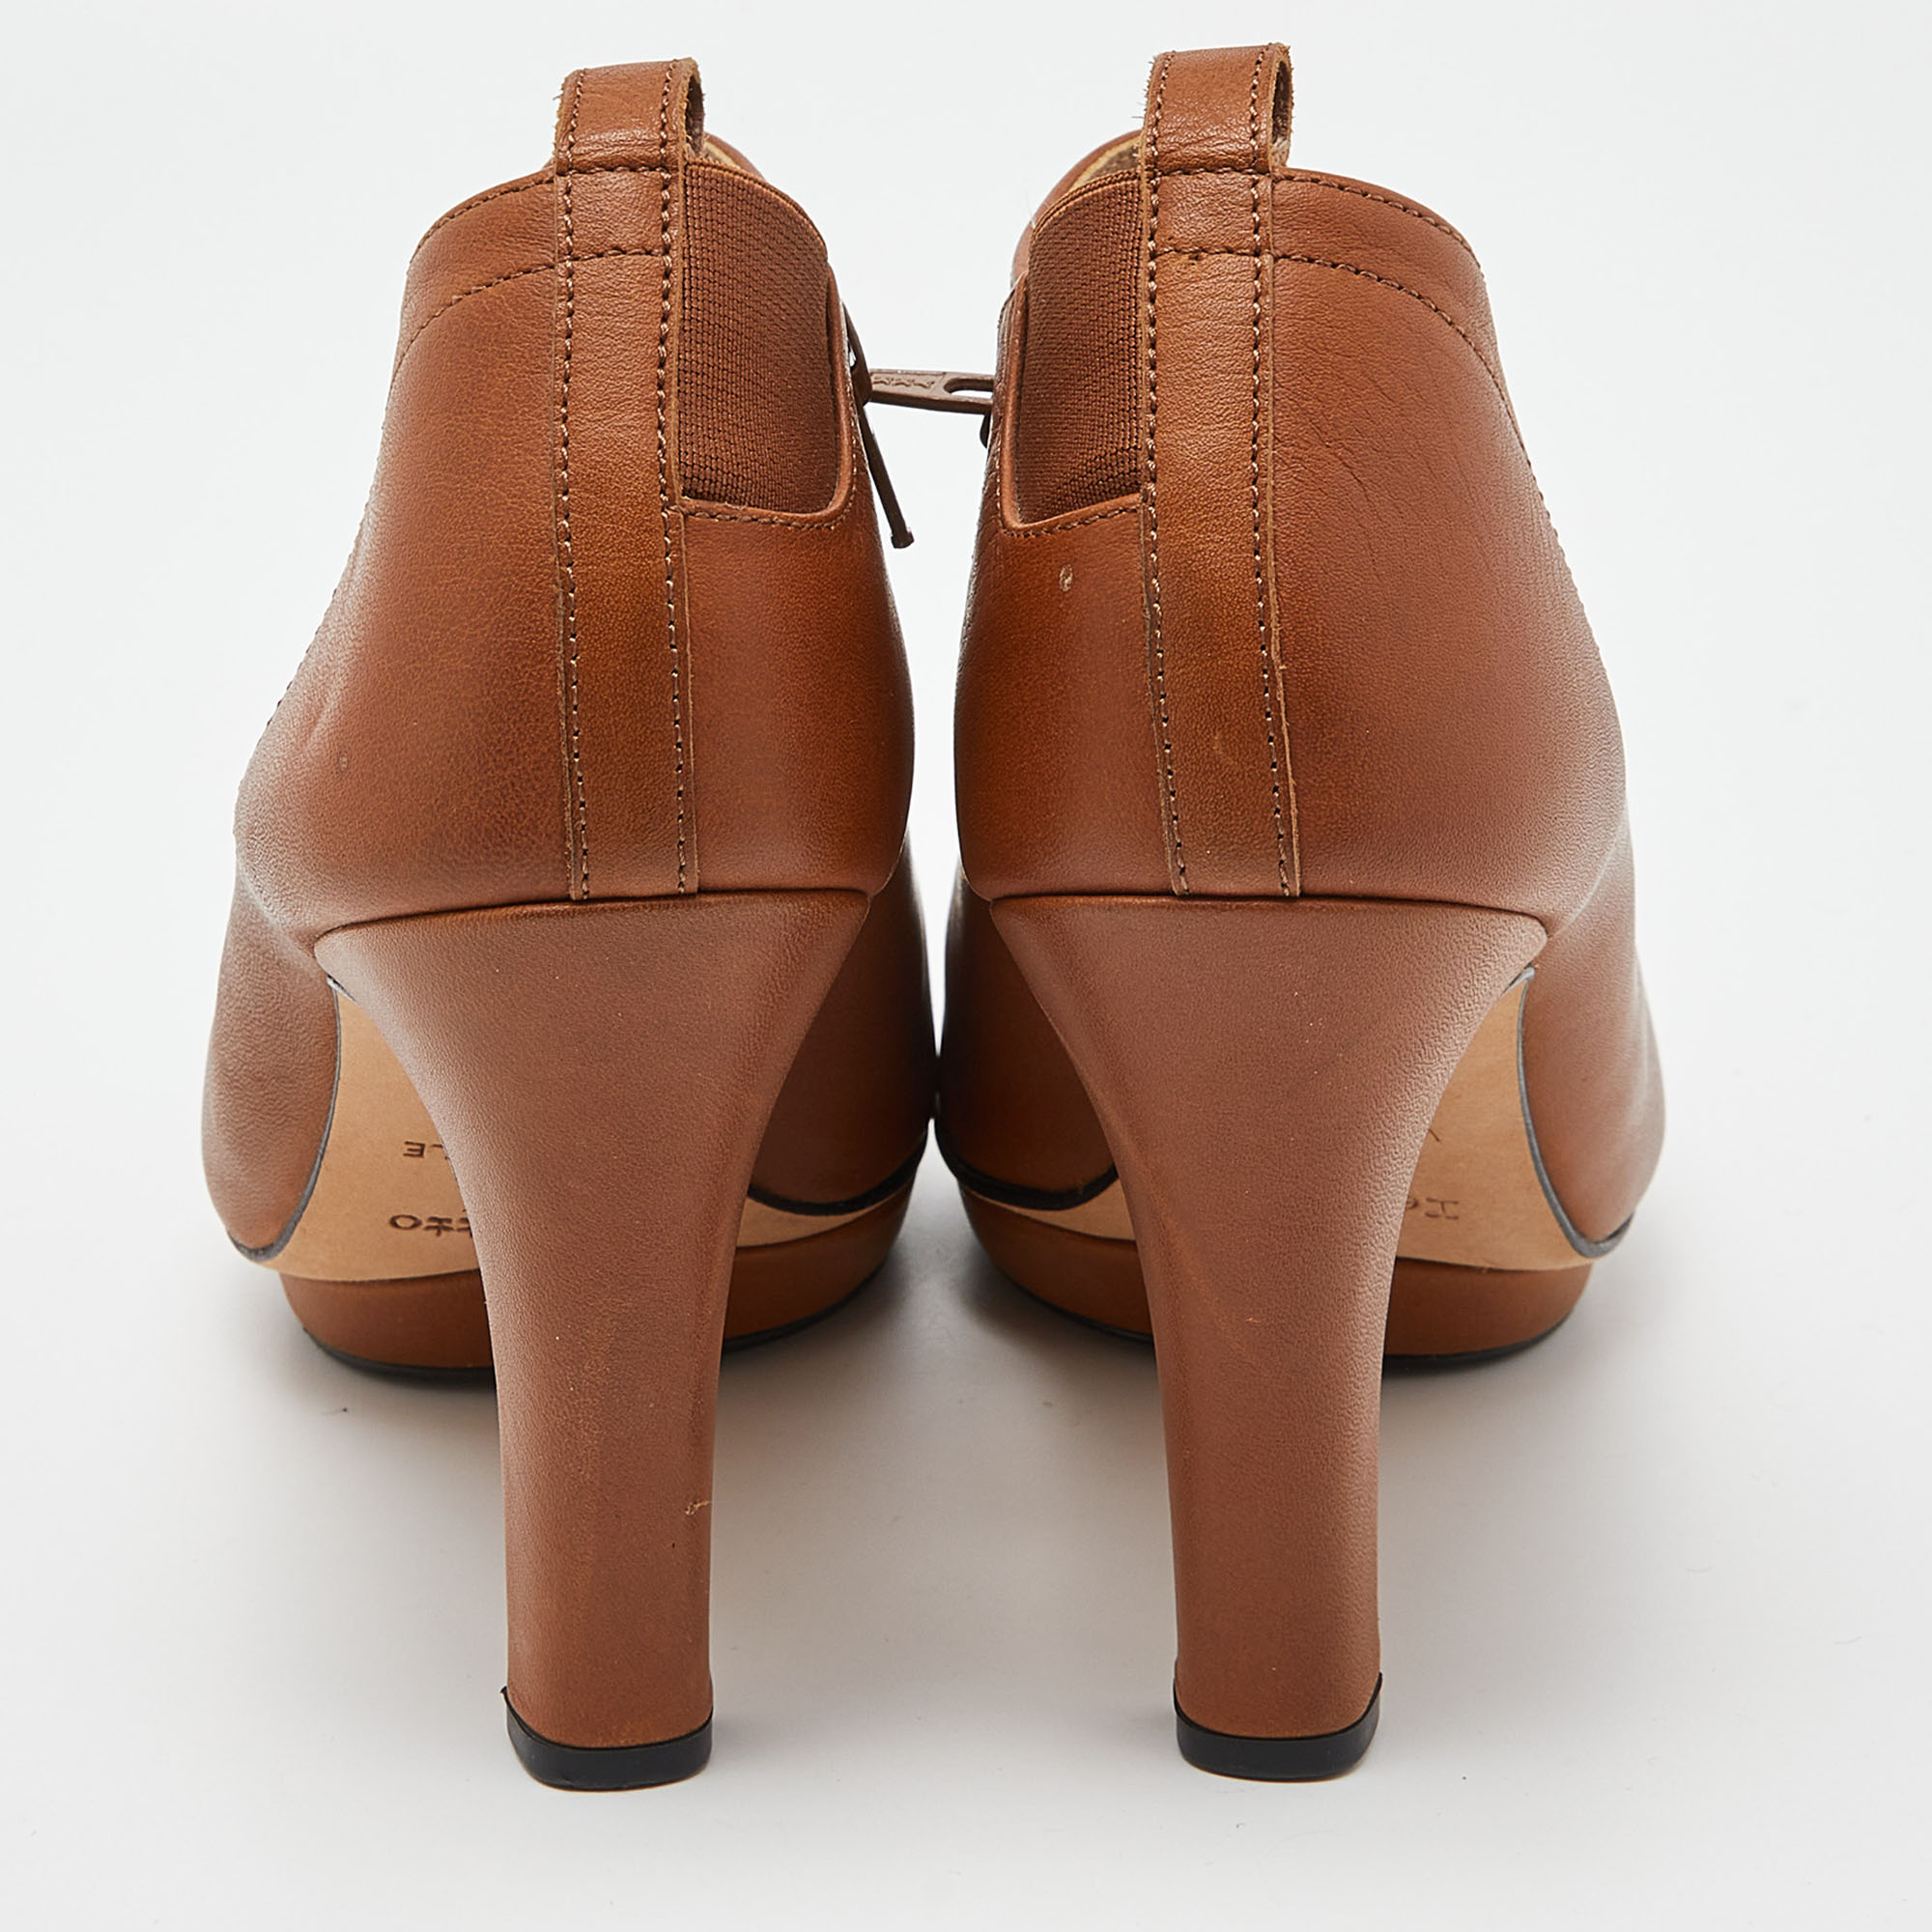 Repetto Brown Leather Platform Ankle Booties Size 40